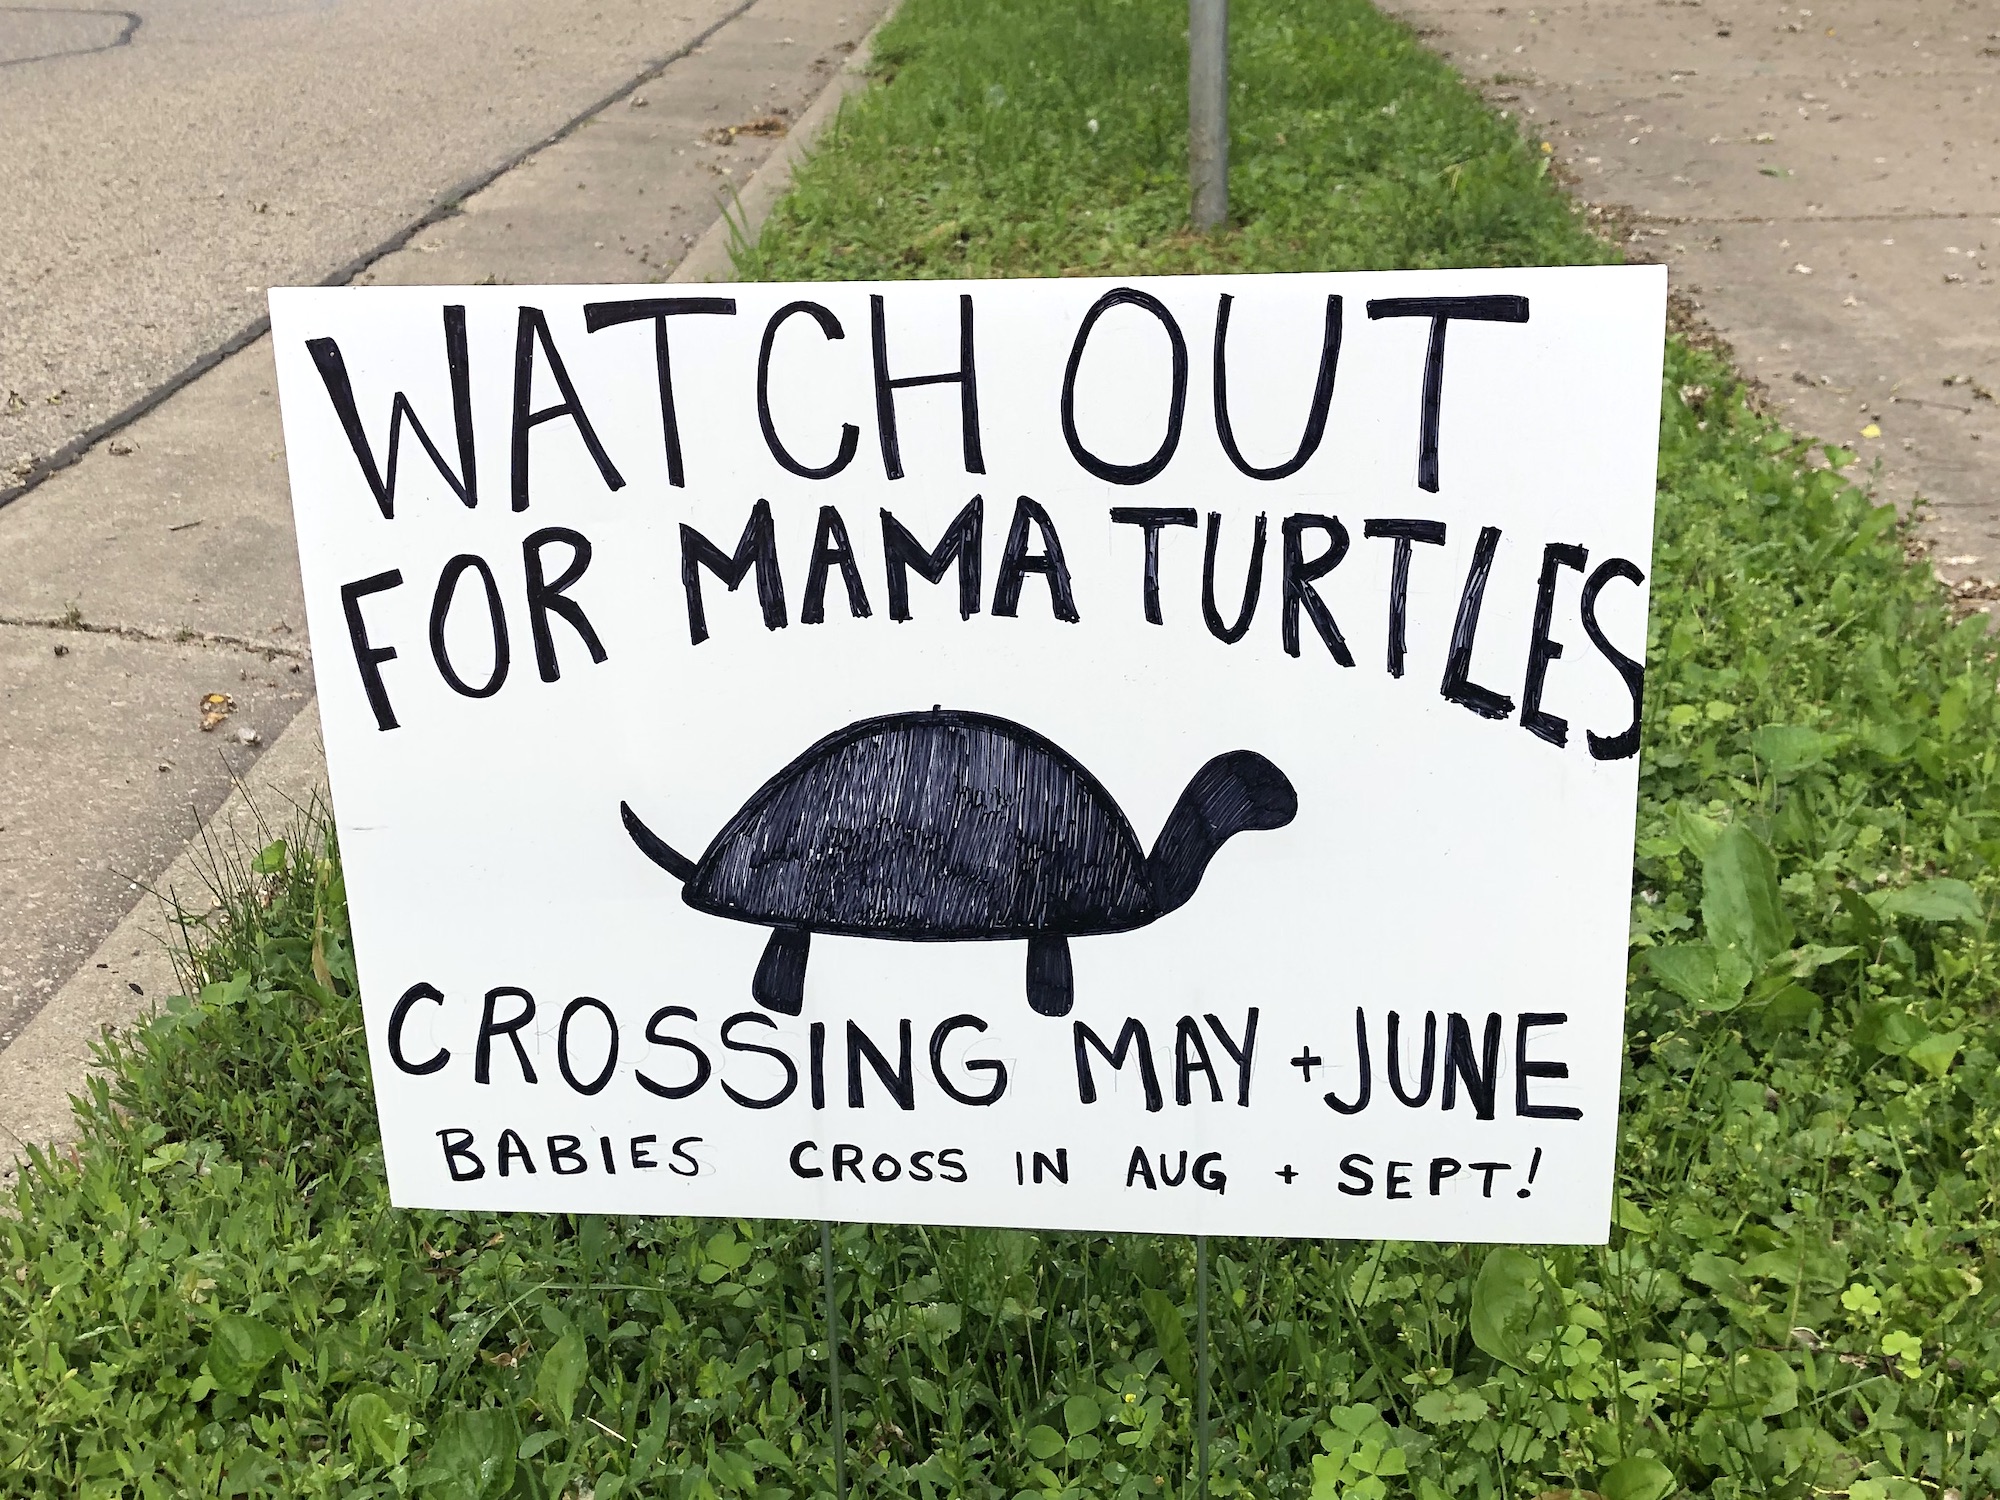 Turtle Crossing Sign near Duck Pond on June 12, 2022.